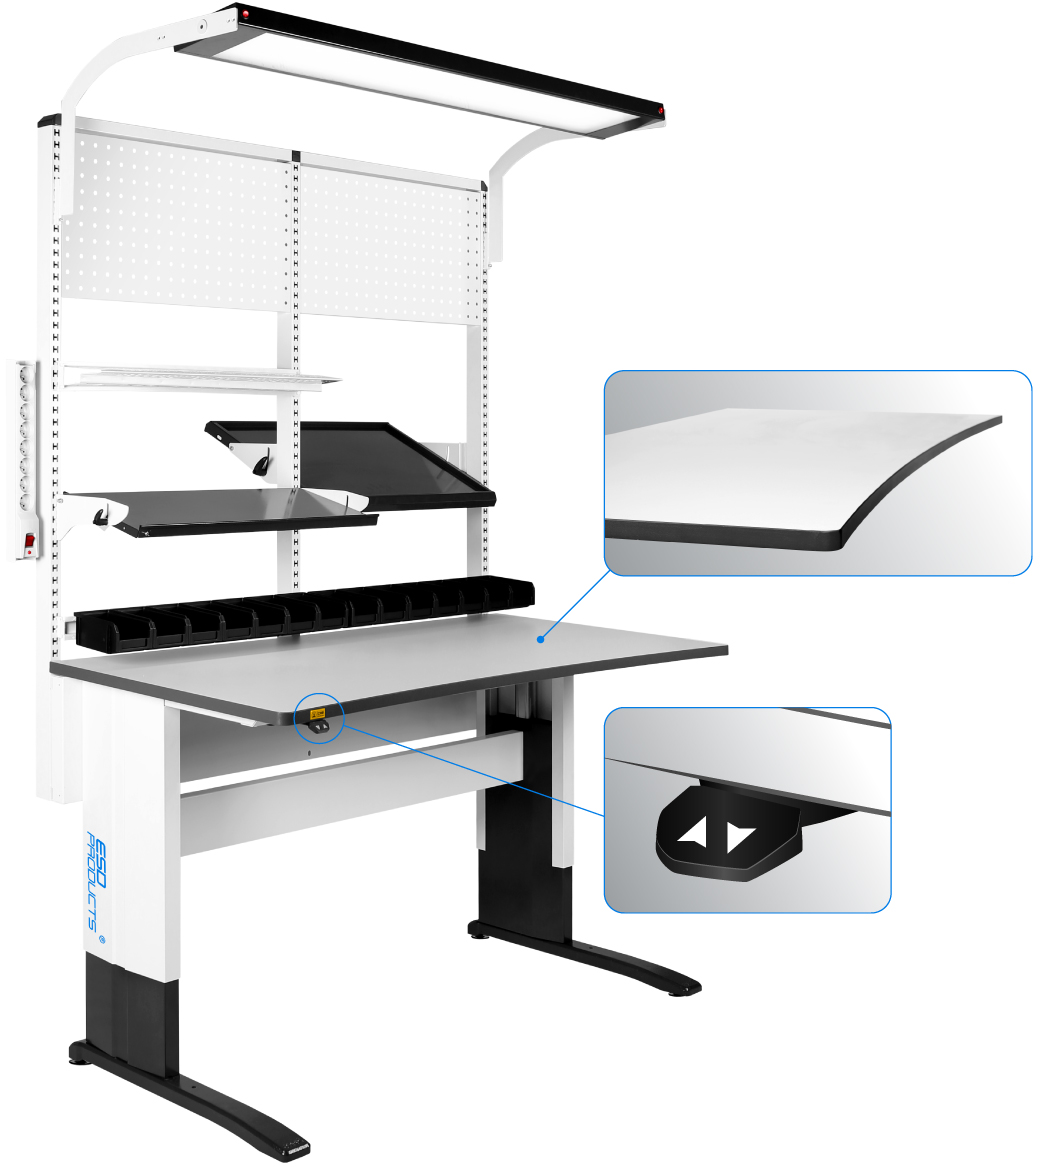 Anti-Static-Workstation-Motorized-Adjustable-Height-Ergonomic-Table-Top-Reeco-Robert-1200-x-800-mm-ESD-Products-AES